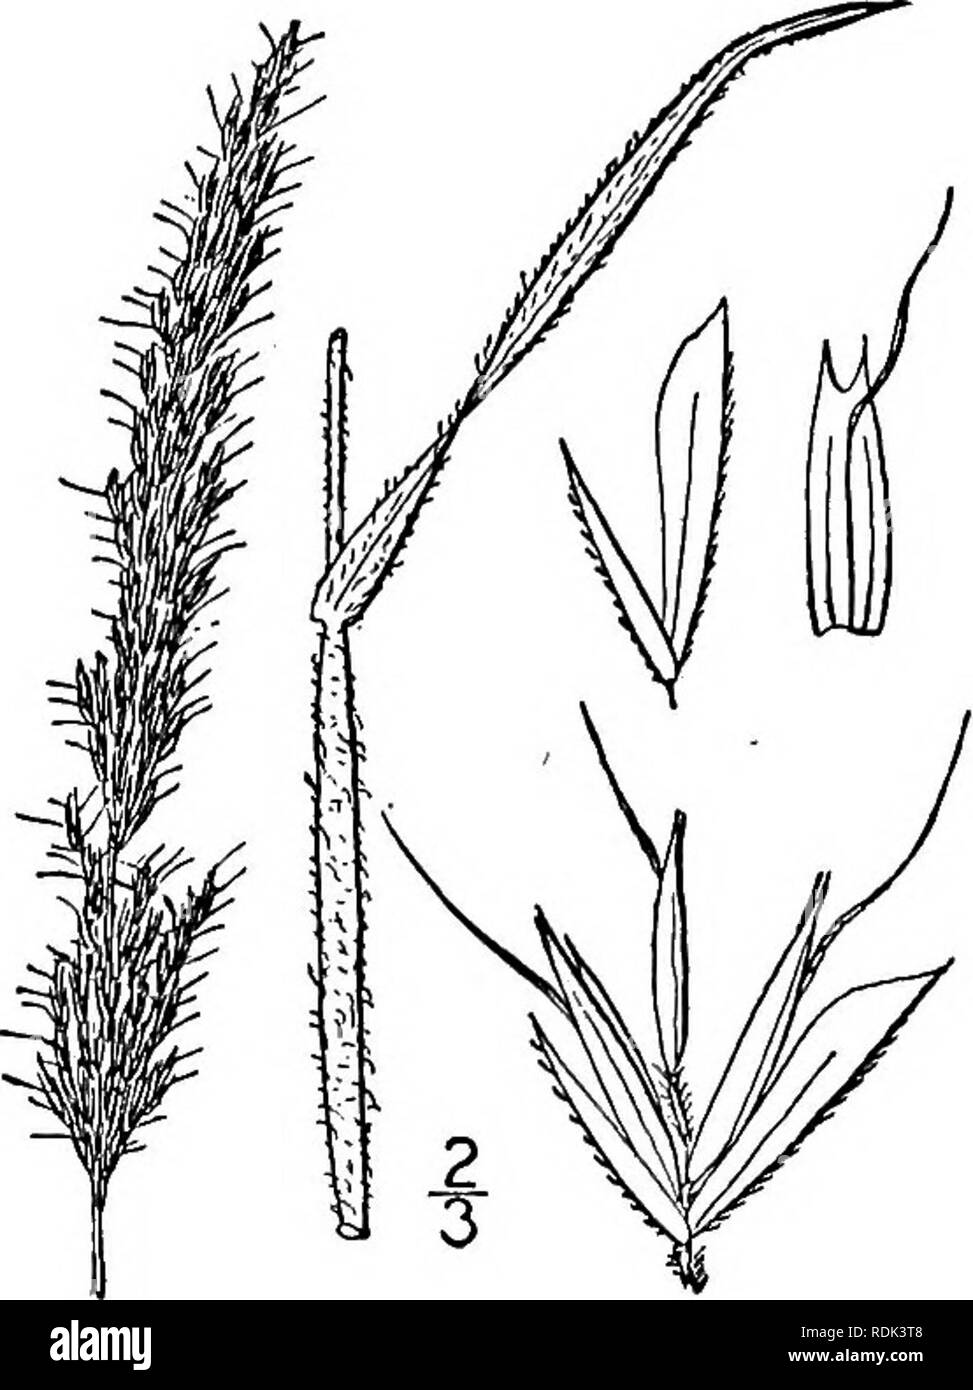 . An illustrated flora of the northern United States, Canada and the British possessions, from Newfoundland to the parallel of the southern boundary of Virginia, and from the Atlantic Ocean westward to the 102d meridian. Botany; Botany. Genus 52. GRASS FAMILY. 217 1. Trisetum spicatum (L.) Richter. Narrow False Oat. Fig. 523. Aira spicata L. Sp. PI. 64. 1753. Aira subspicata L. Syst. Veg. Ed. io, 673. 1759. Avena mollis Michx. Fl. Bor. Am. 1: 72. 1803. Trisetum subspicatum Beauv. Agrost. 180. 1812. T. spicatum Richter, PI. Europ. 1: 59. 1890. Softly pubescent or glabrous, culms 6'-2G tall, ere Stock Photo